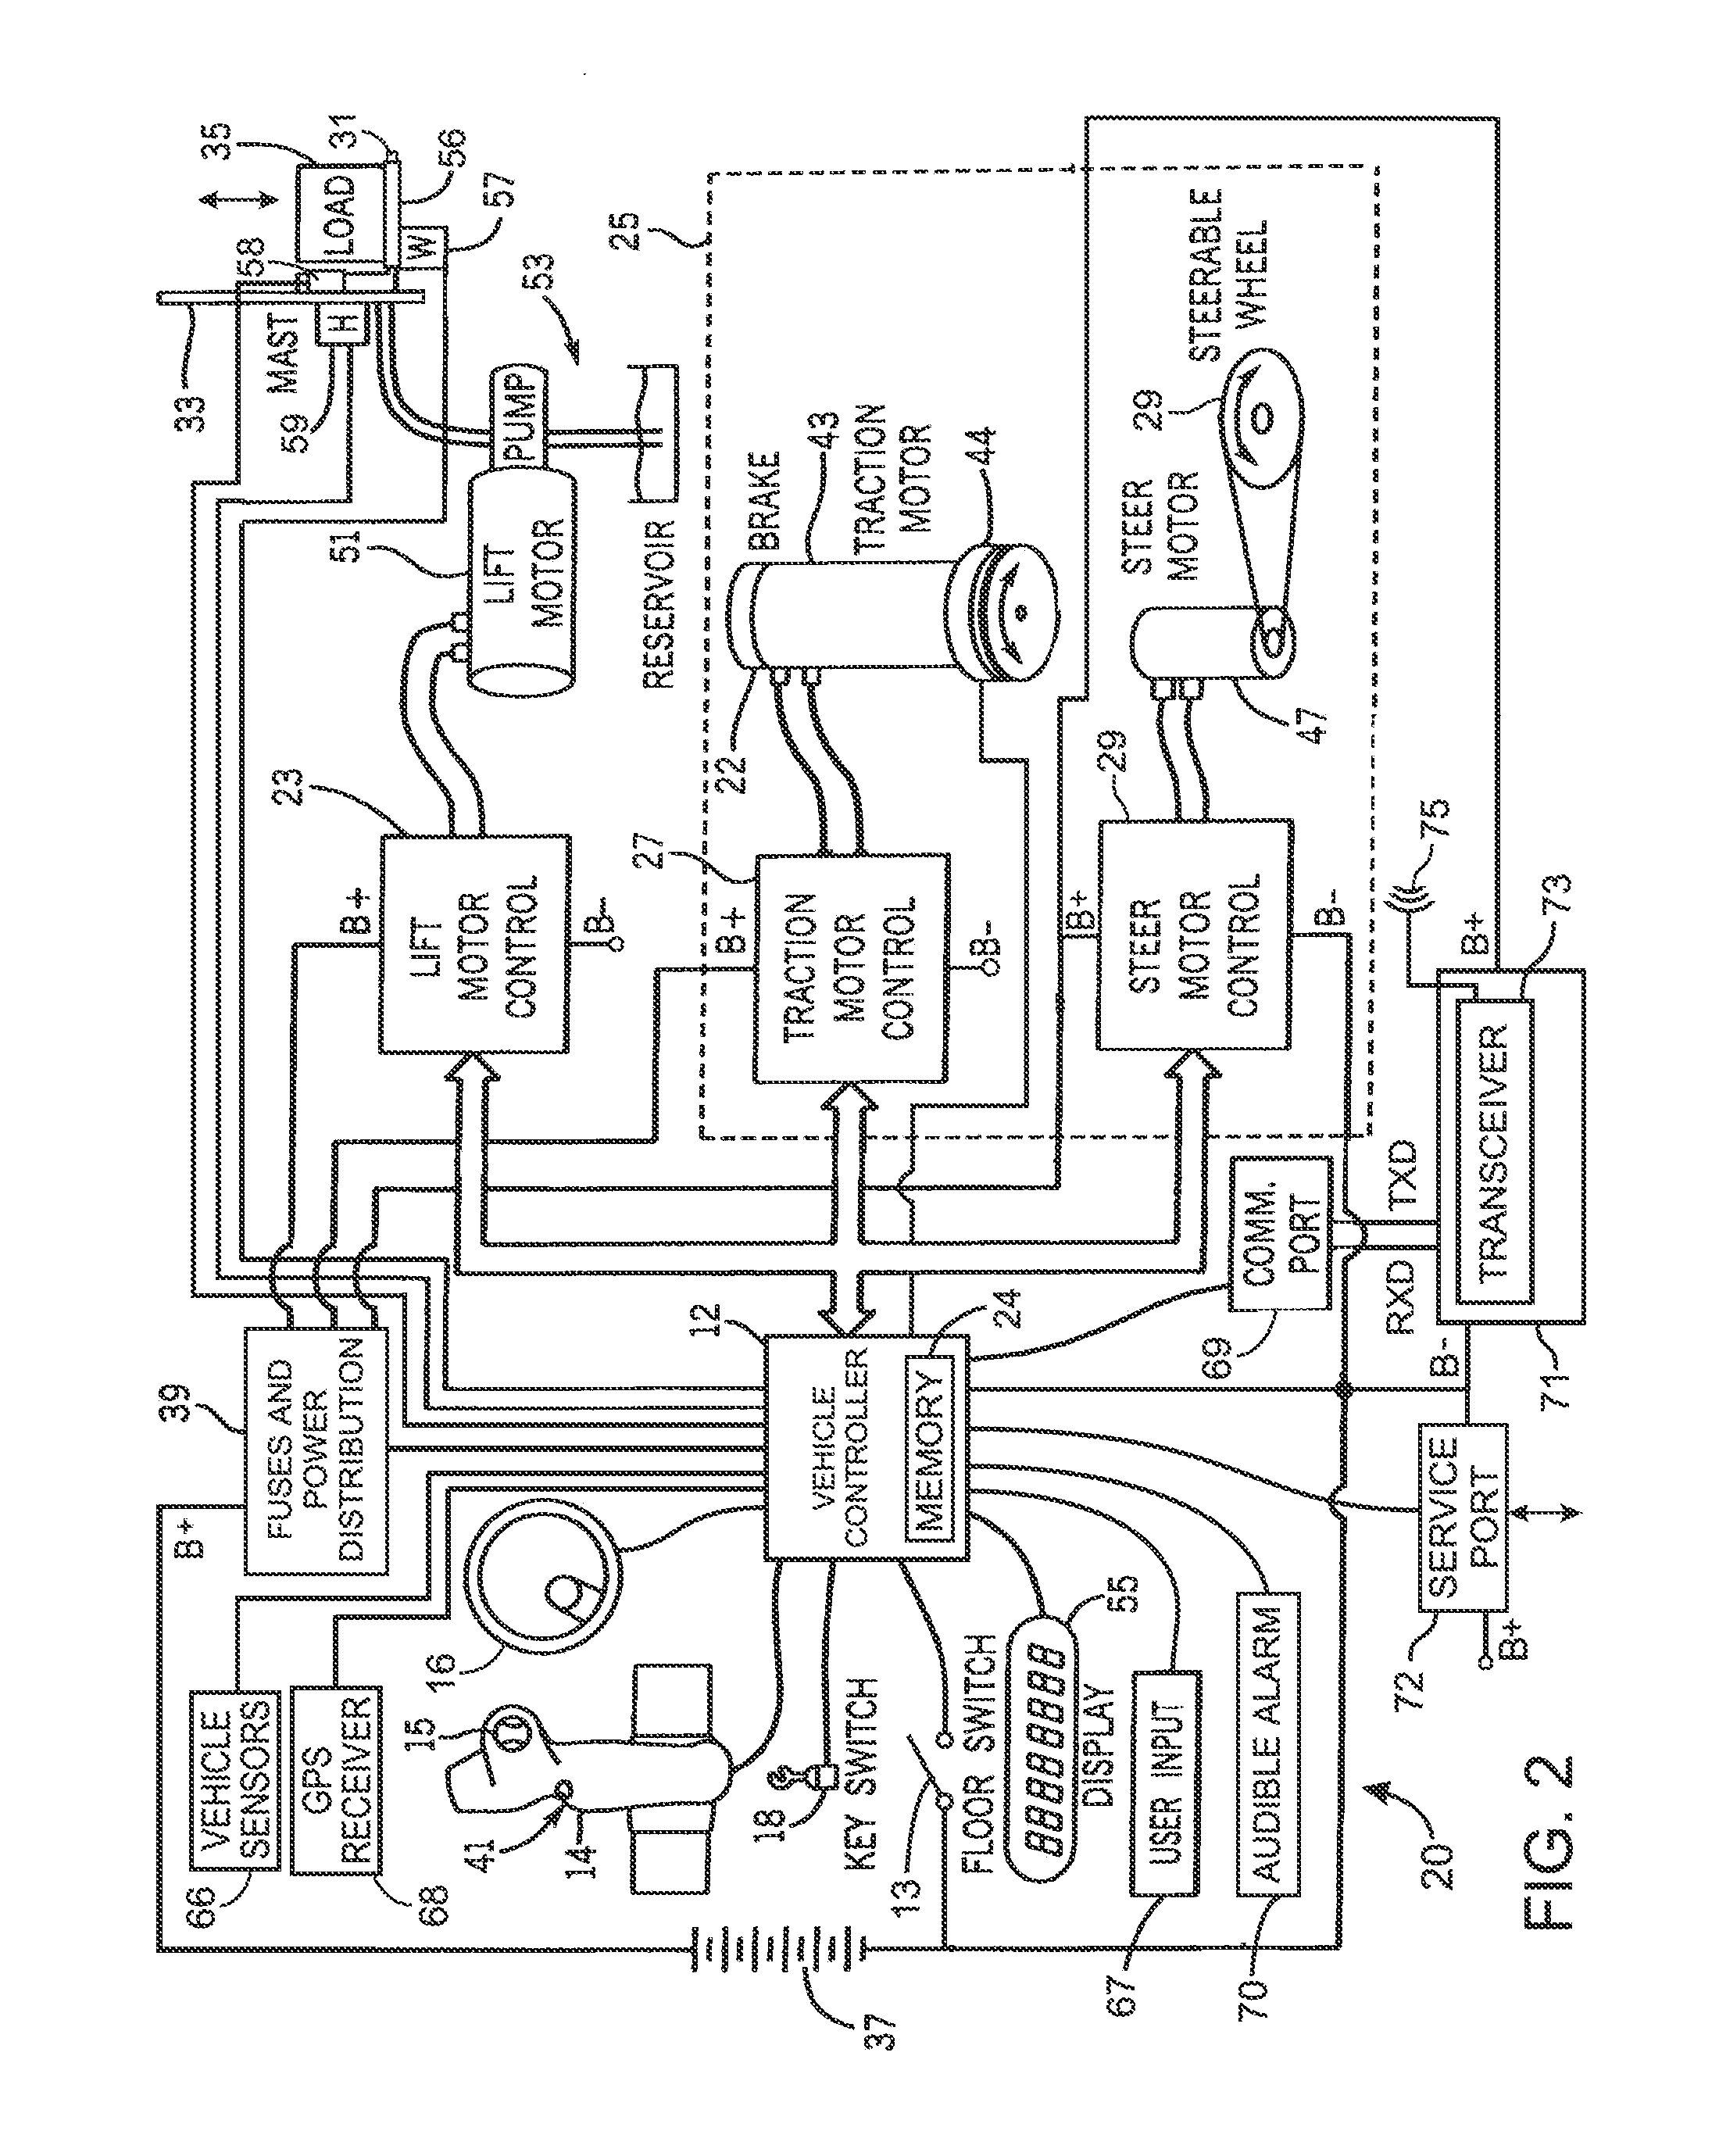 System for accessing information for maintaining and repairing industrial vehicles